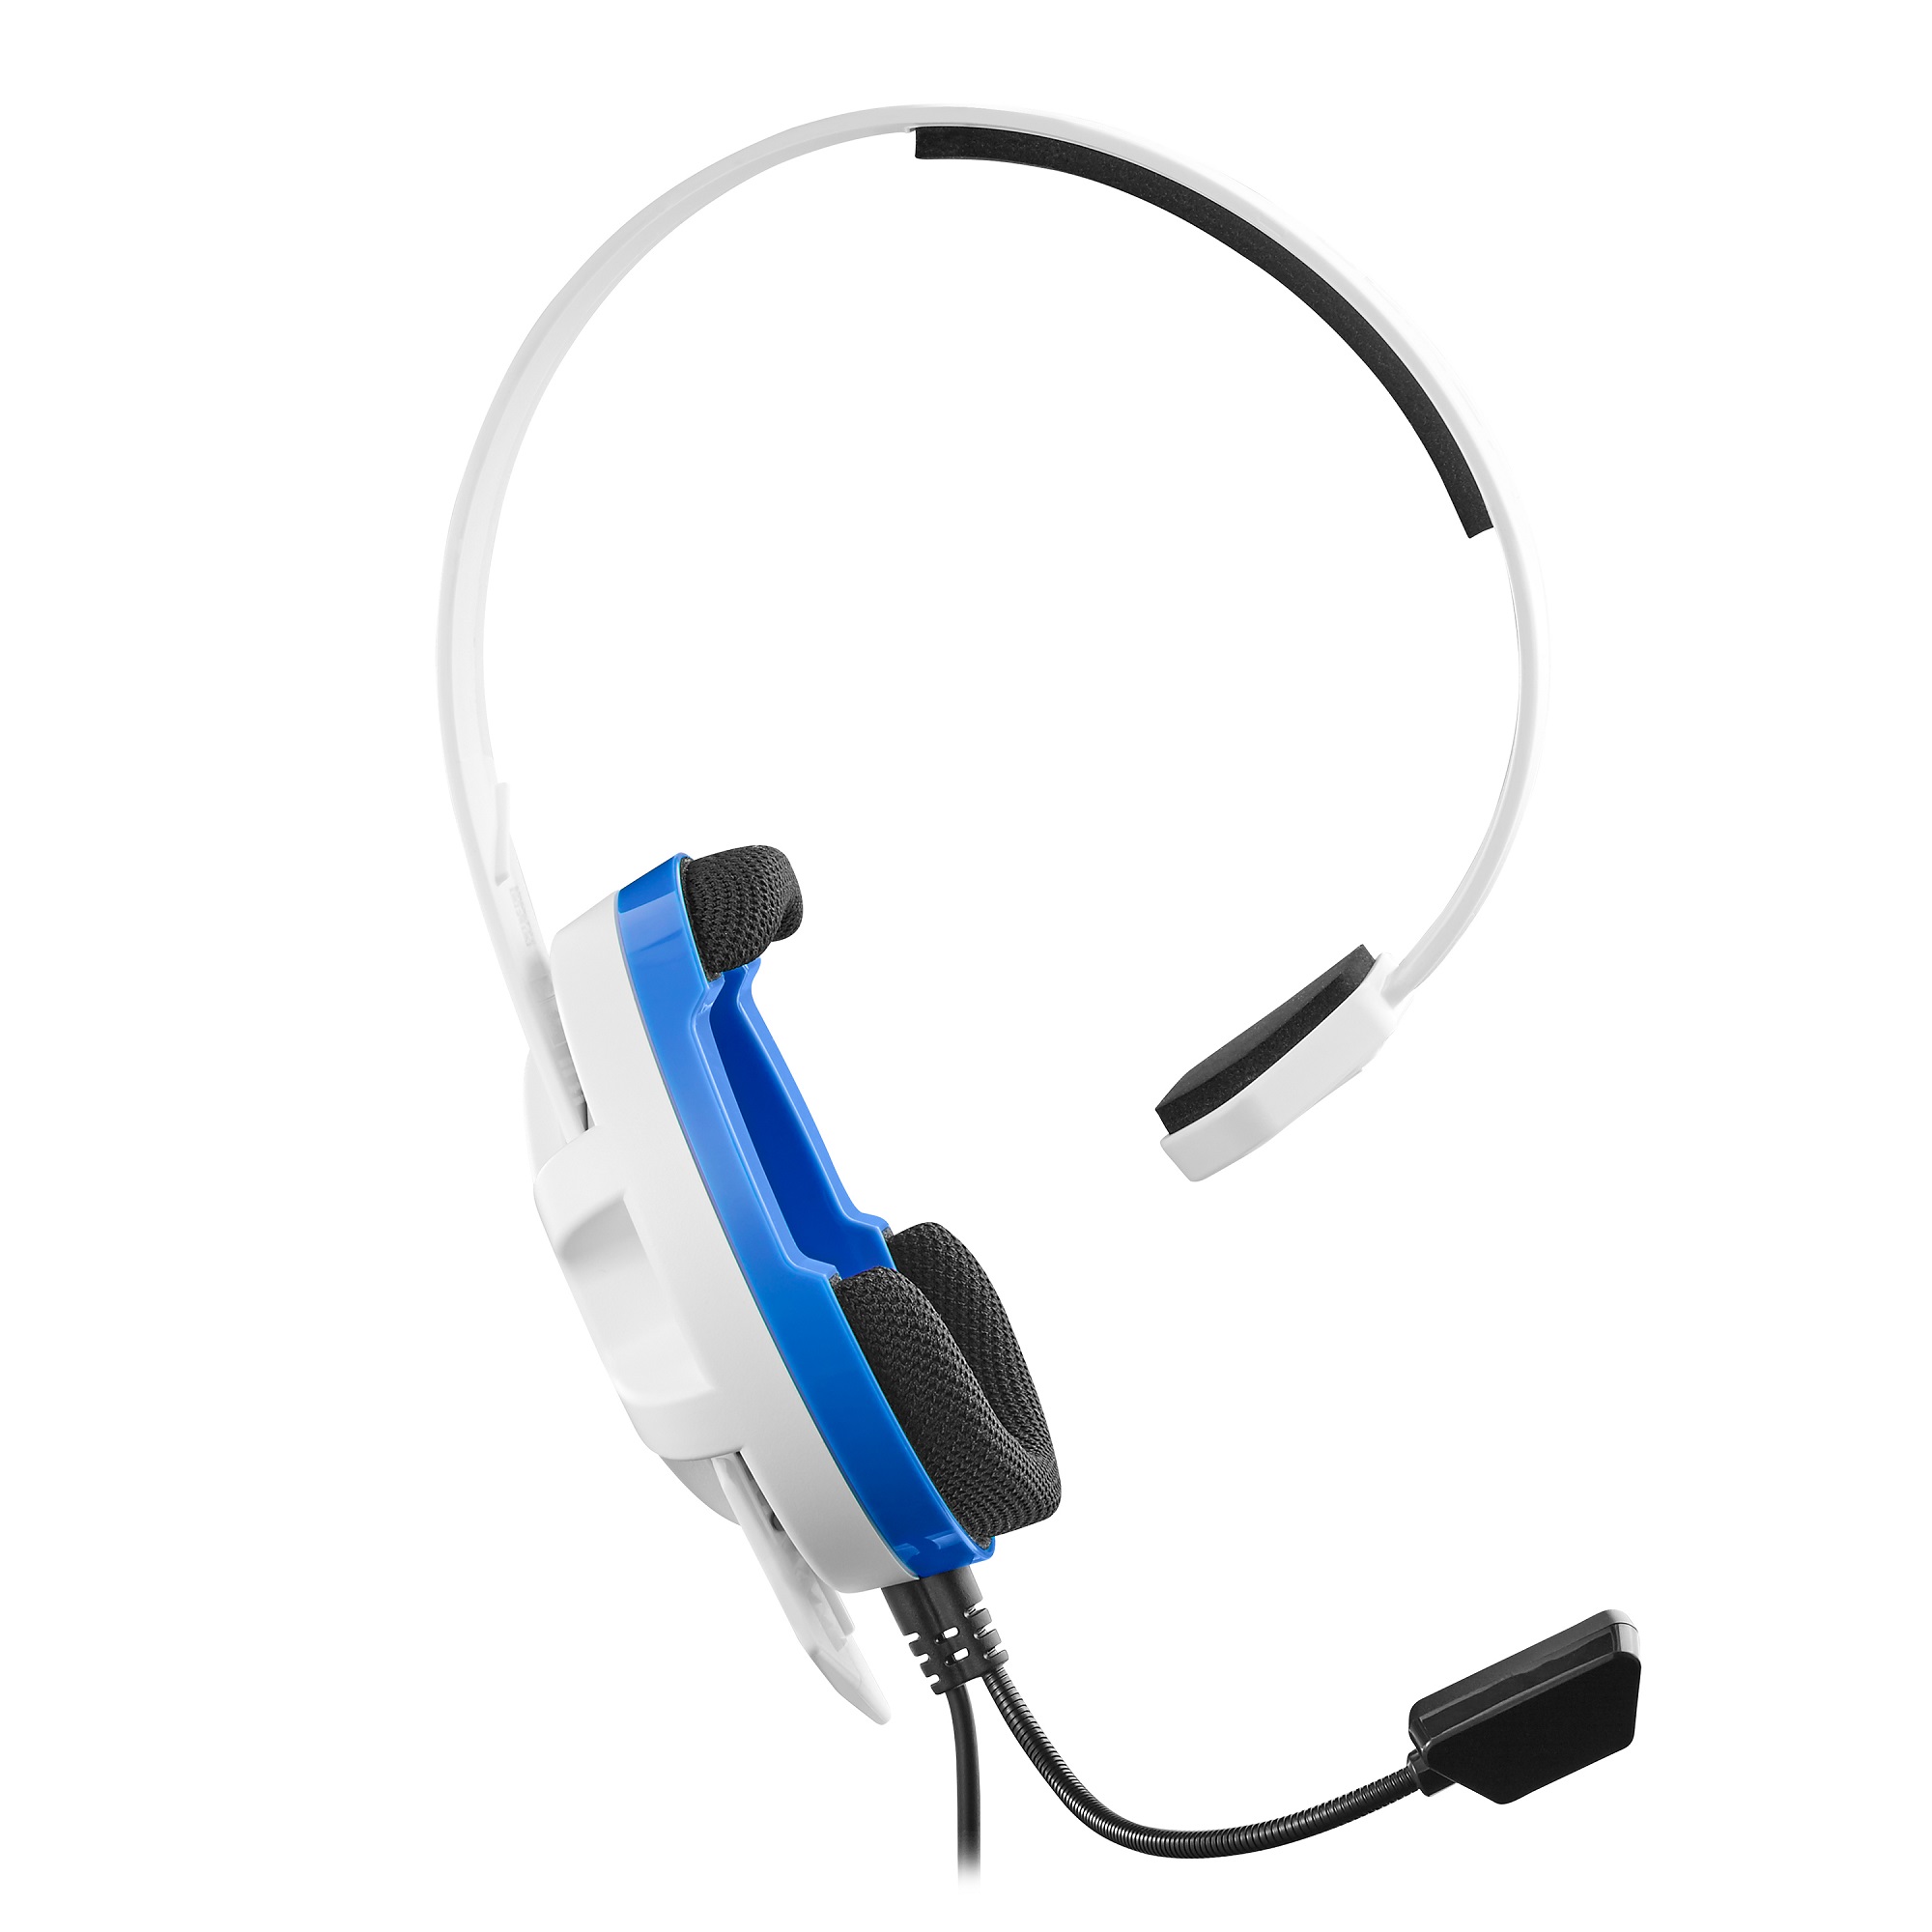 Turtle Beach Recon Chat Headset for PS4, Xbox One, PC, Mobile (White) - image 3 of 5